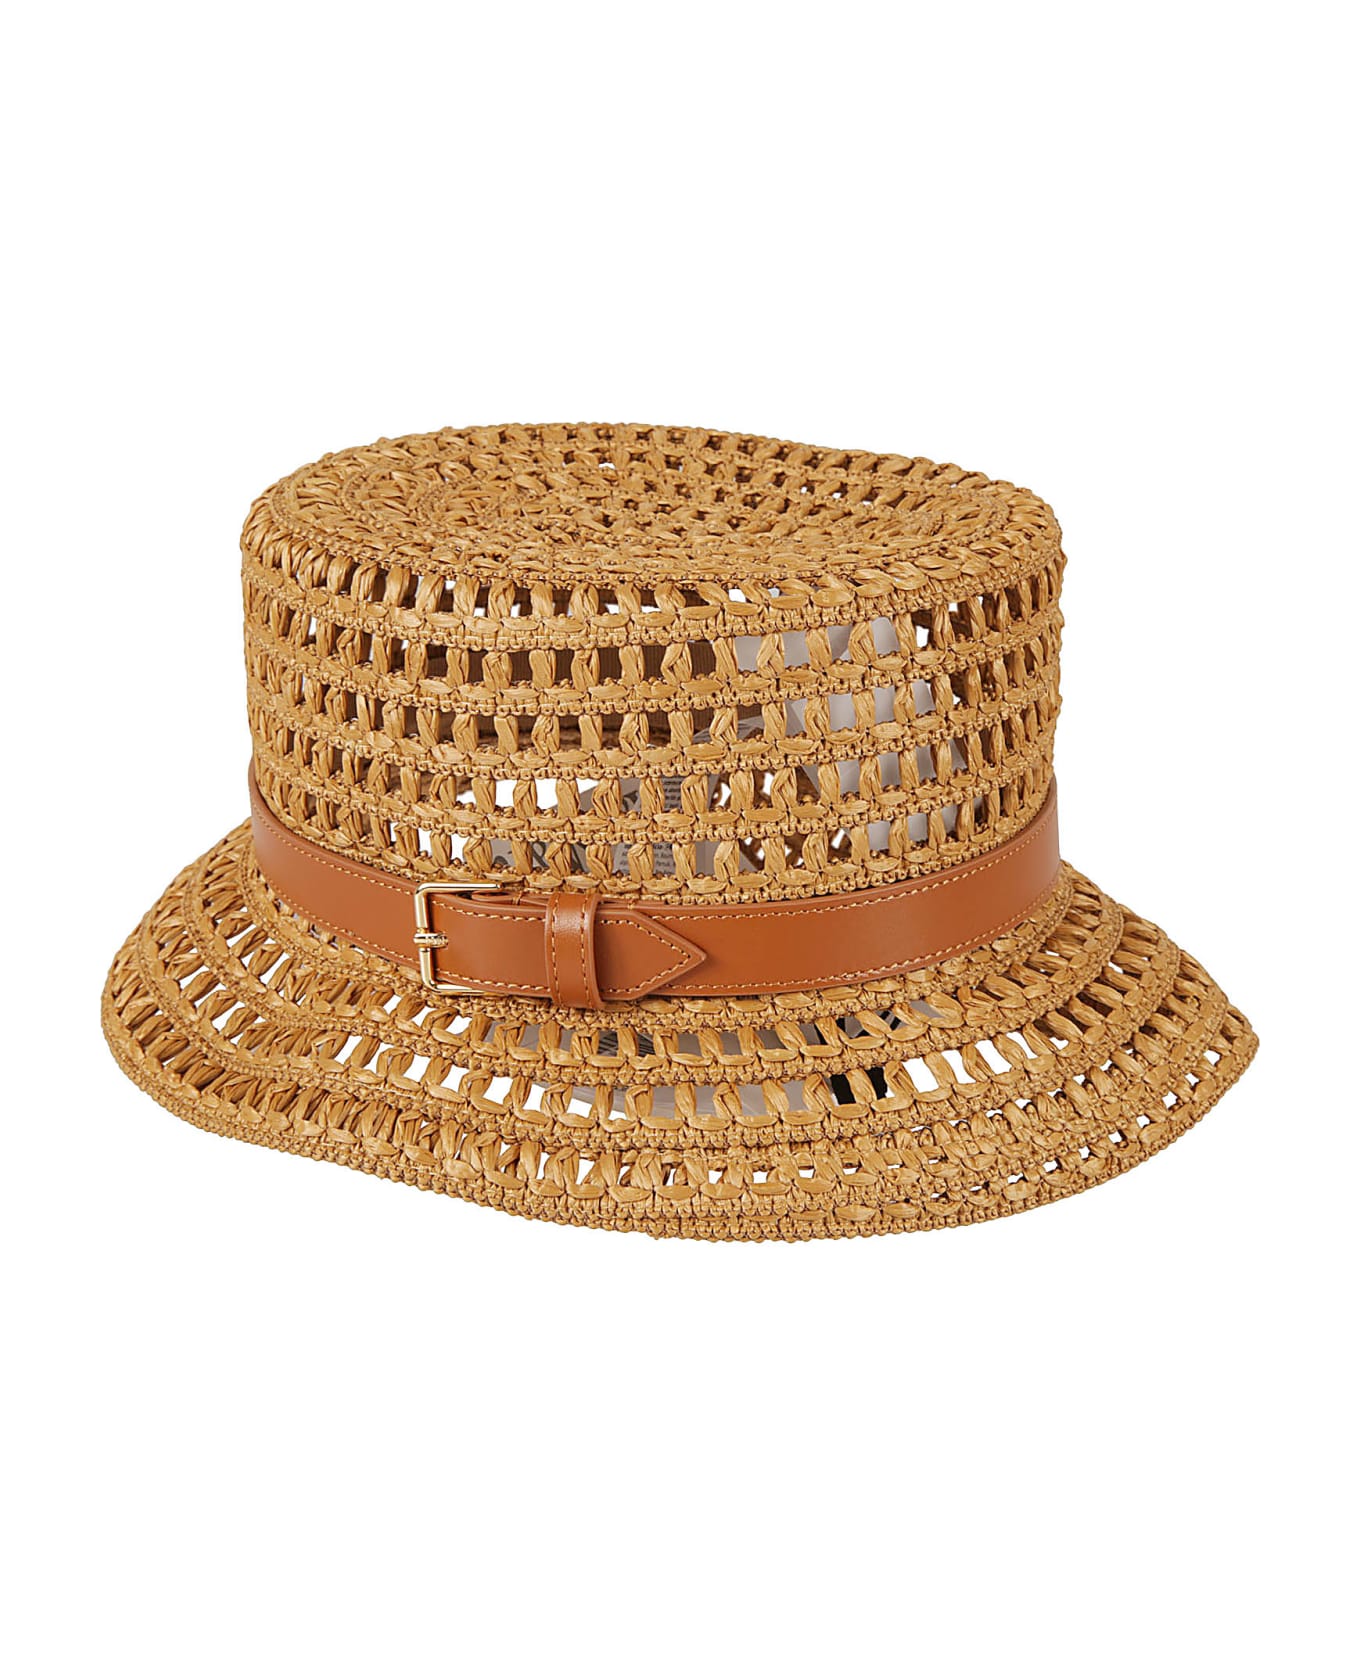 Max Mara Logo Plaque Perforated Woven Hat - BROWN